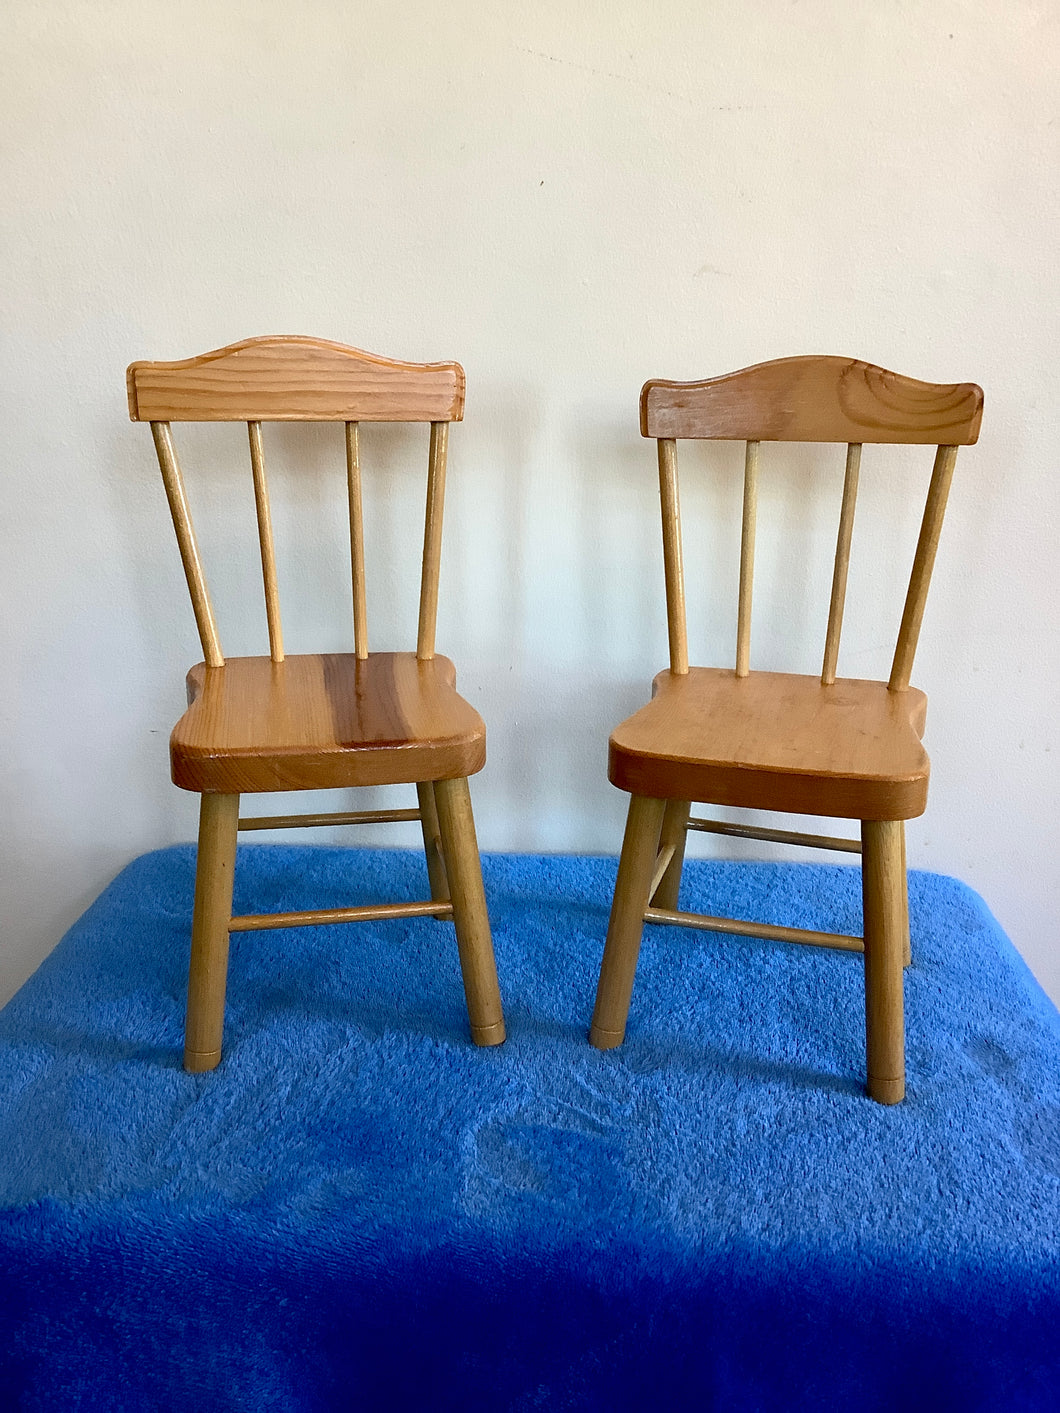 Solid Wood Doll Chairs - Set of 2